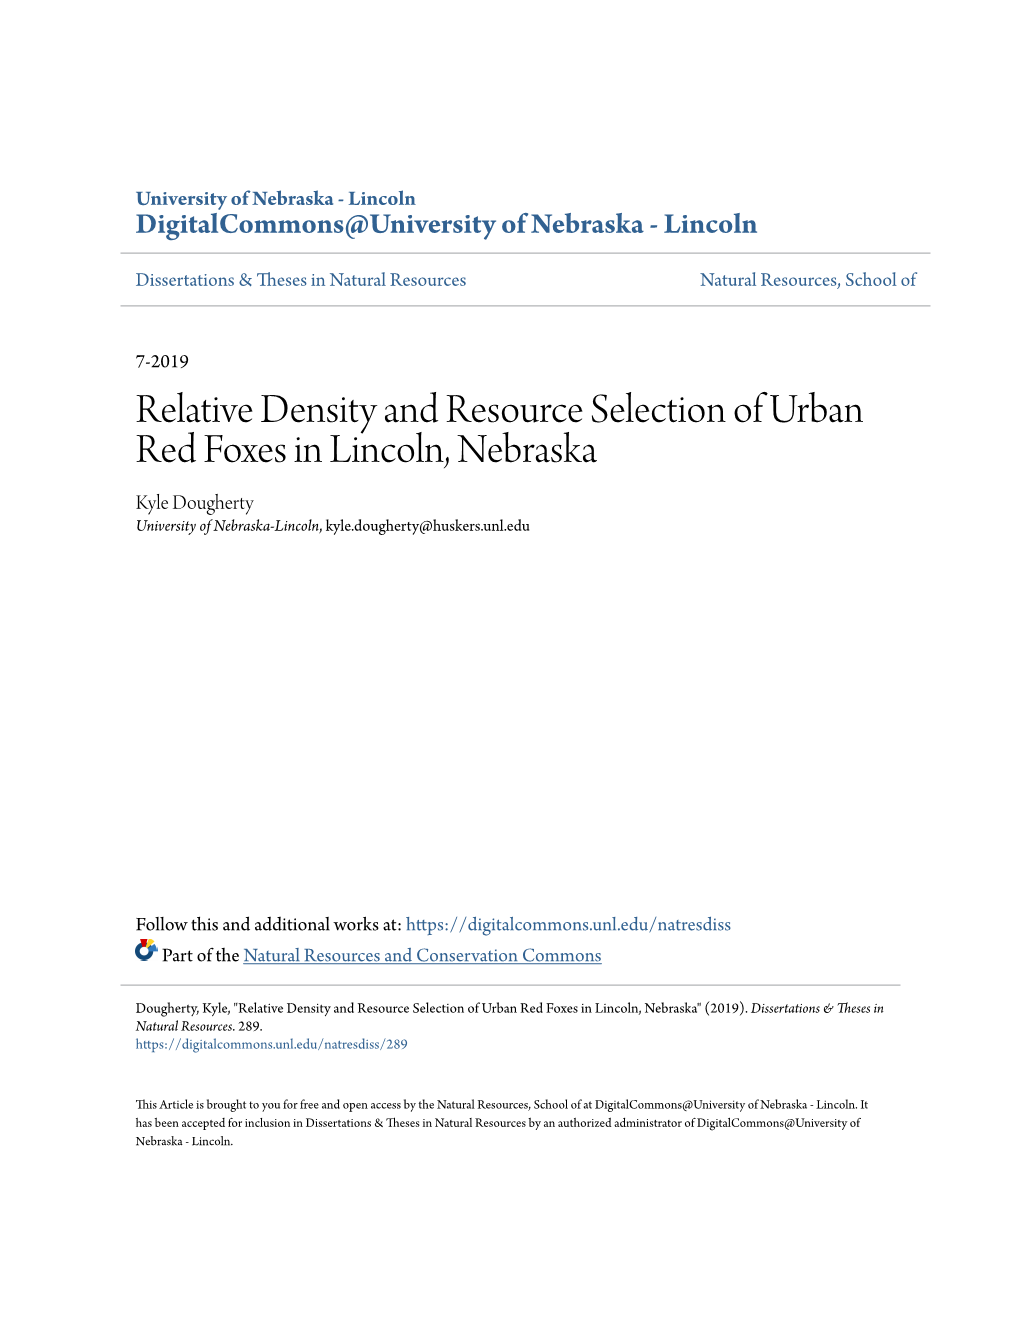 Relative Density and Resource Selection of Urban Red Foxes in Lincoln, Nebraska Kyle Dougherty University of Nebraska-Lincoln, Kyle.Dougherty@Huskers.Unl.Edu